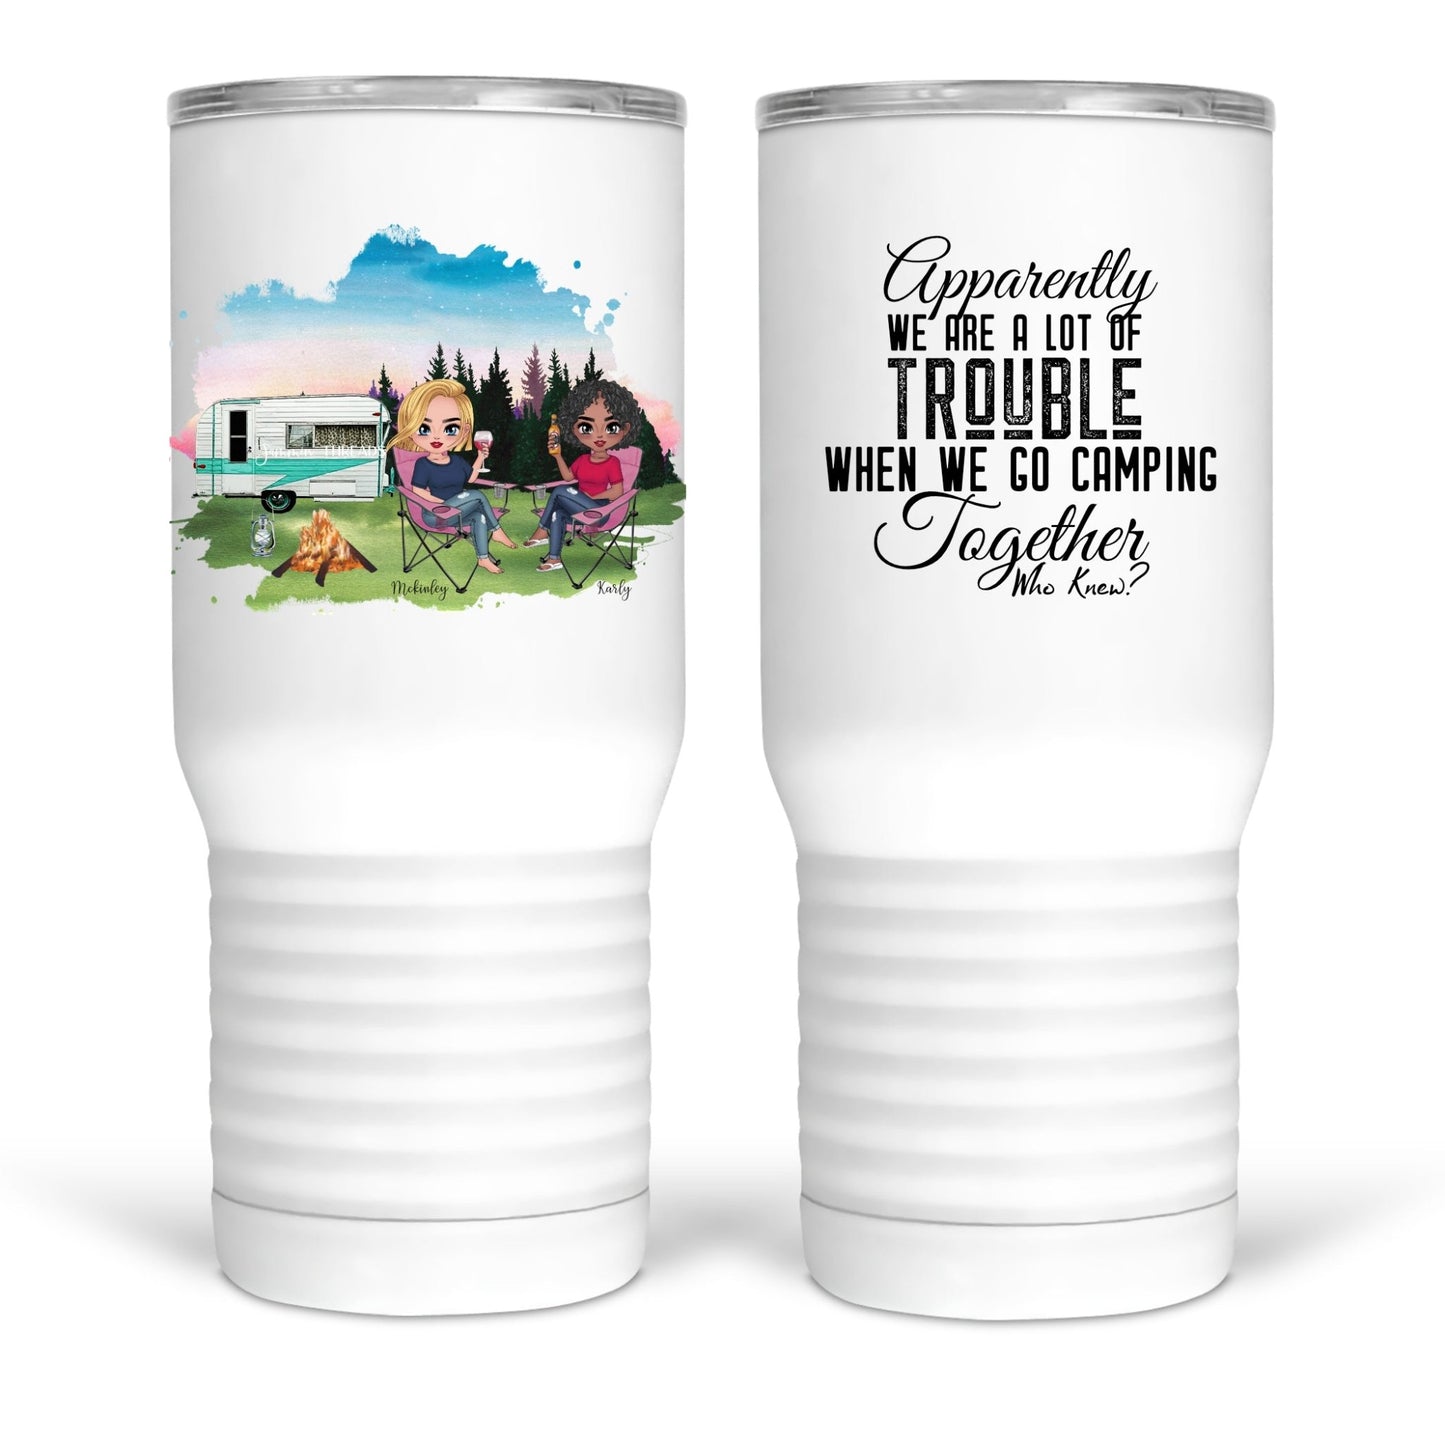 Apparently, we are trouble when we camp together. Custom girlfriends camping mugs and tumblers - Jammin Threads